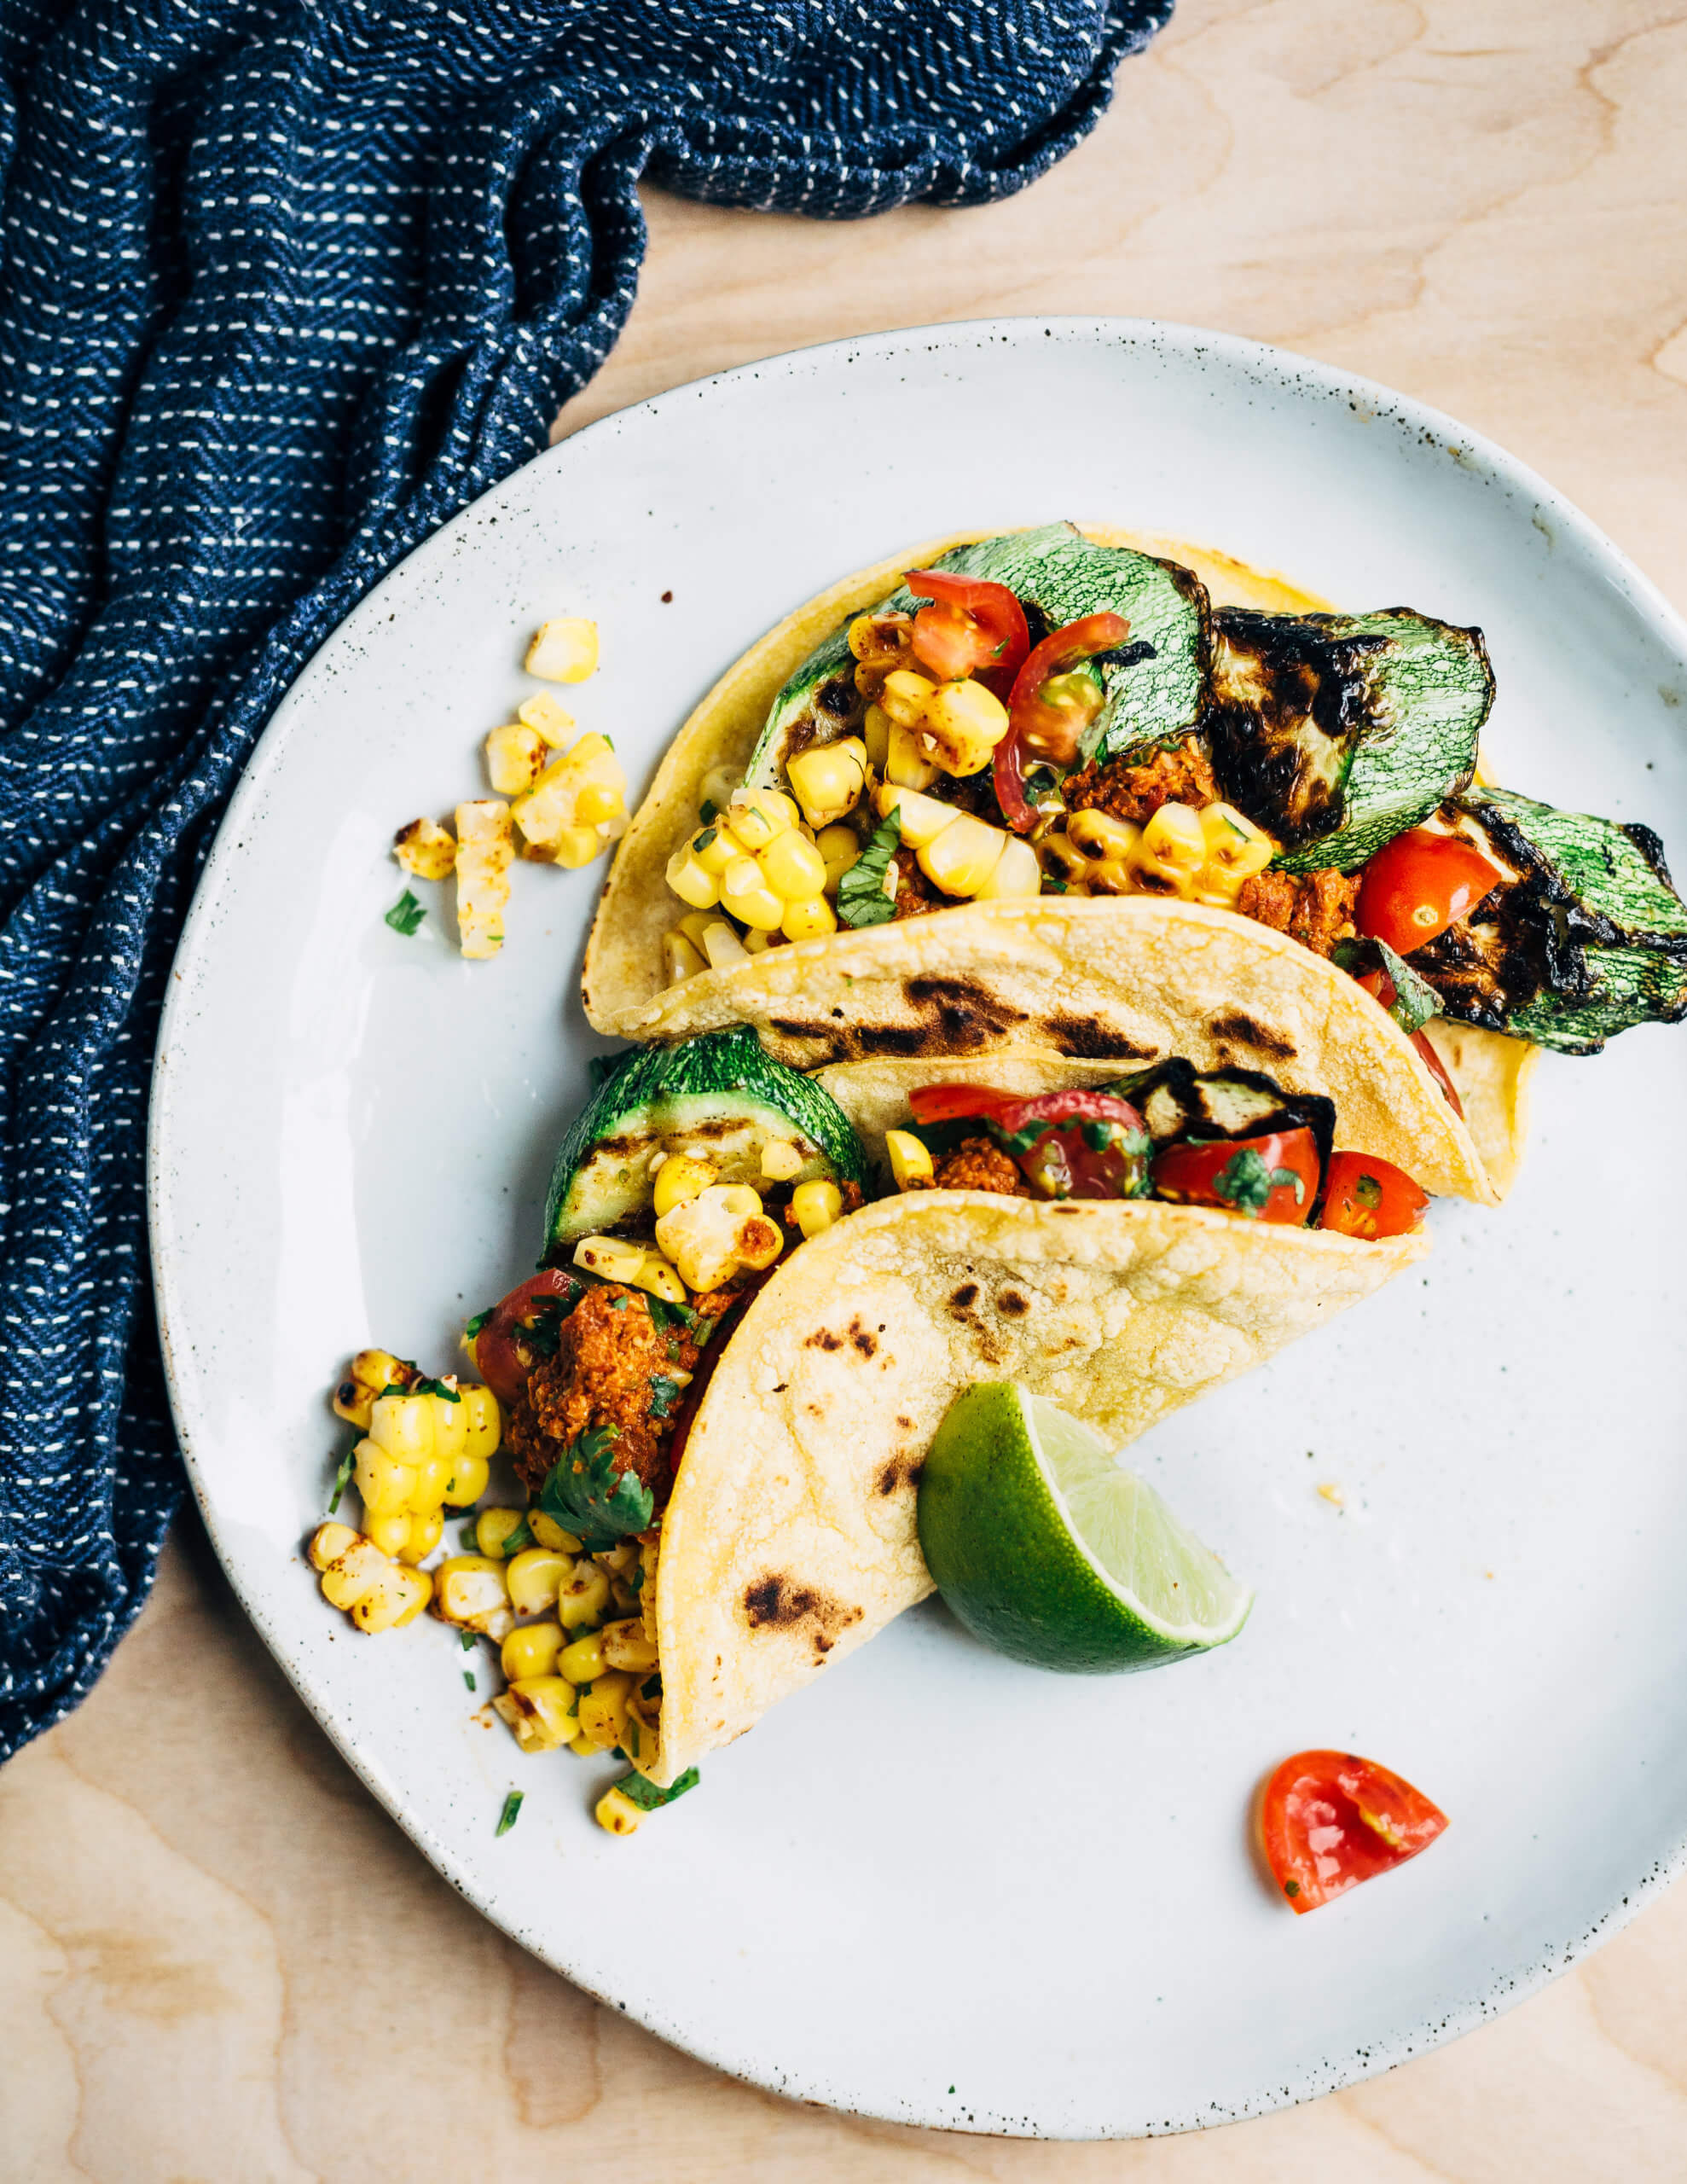 Summer-perfect grilled zucchini and corn tacos with a spicy, smoky plant-based chorizo topping made with sunflower seeds, dried guajillo chilies, and sun-dried tomatoes. 